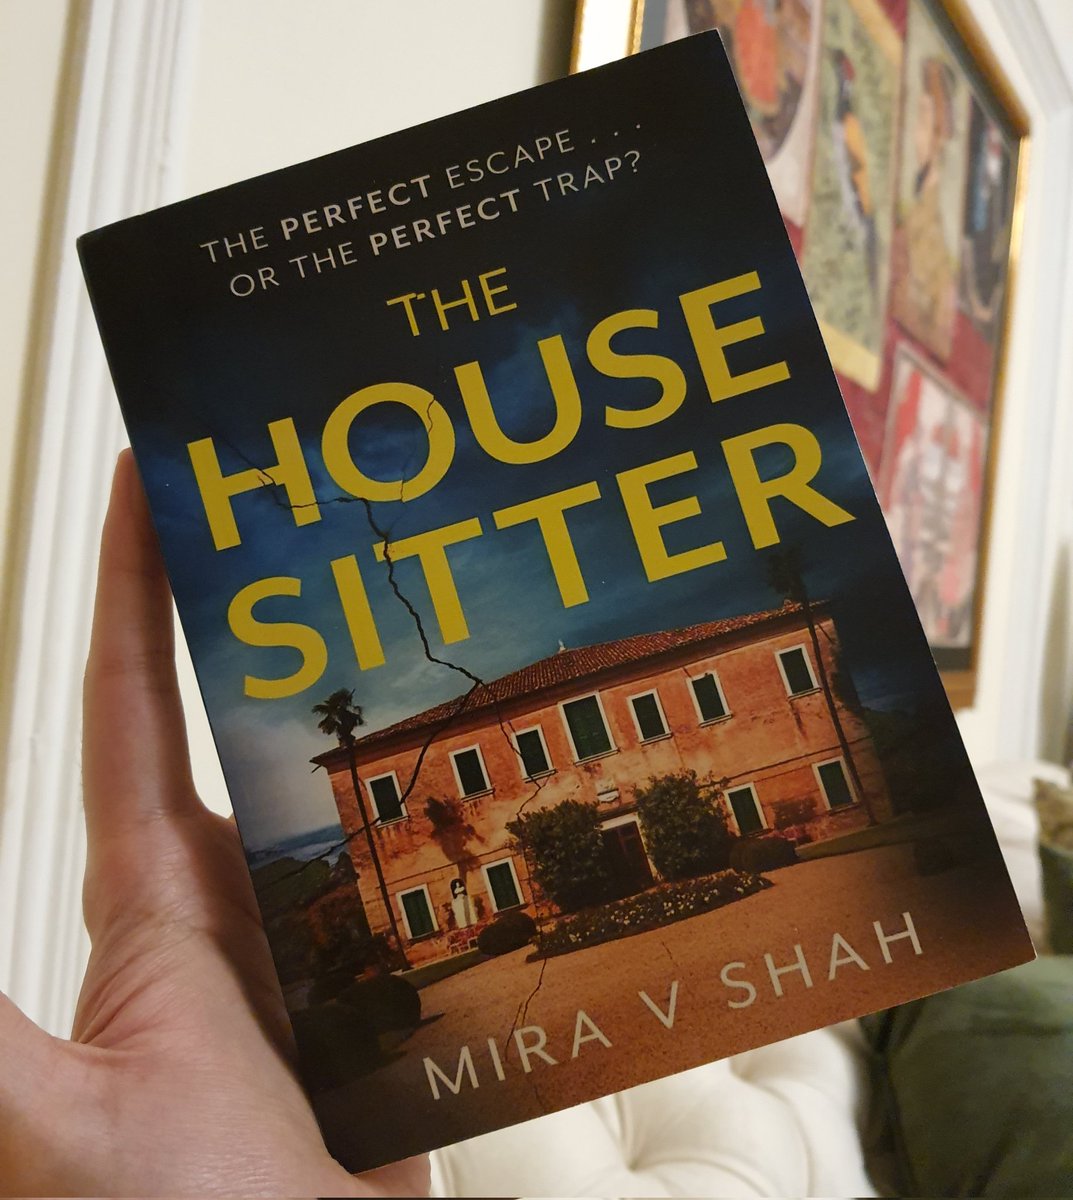 Look what's just arrived in Lahore! A proof copy of @shahvmira 's latest novel THE HOUSE SITTER. I absolutely loved her astonishing debut HER and can't wait to dive right into this one! Mira V Shah is undoubtedly one of UK's most talented writers. Thank you @HodderBooks